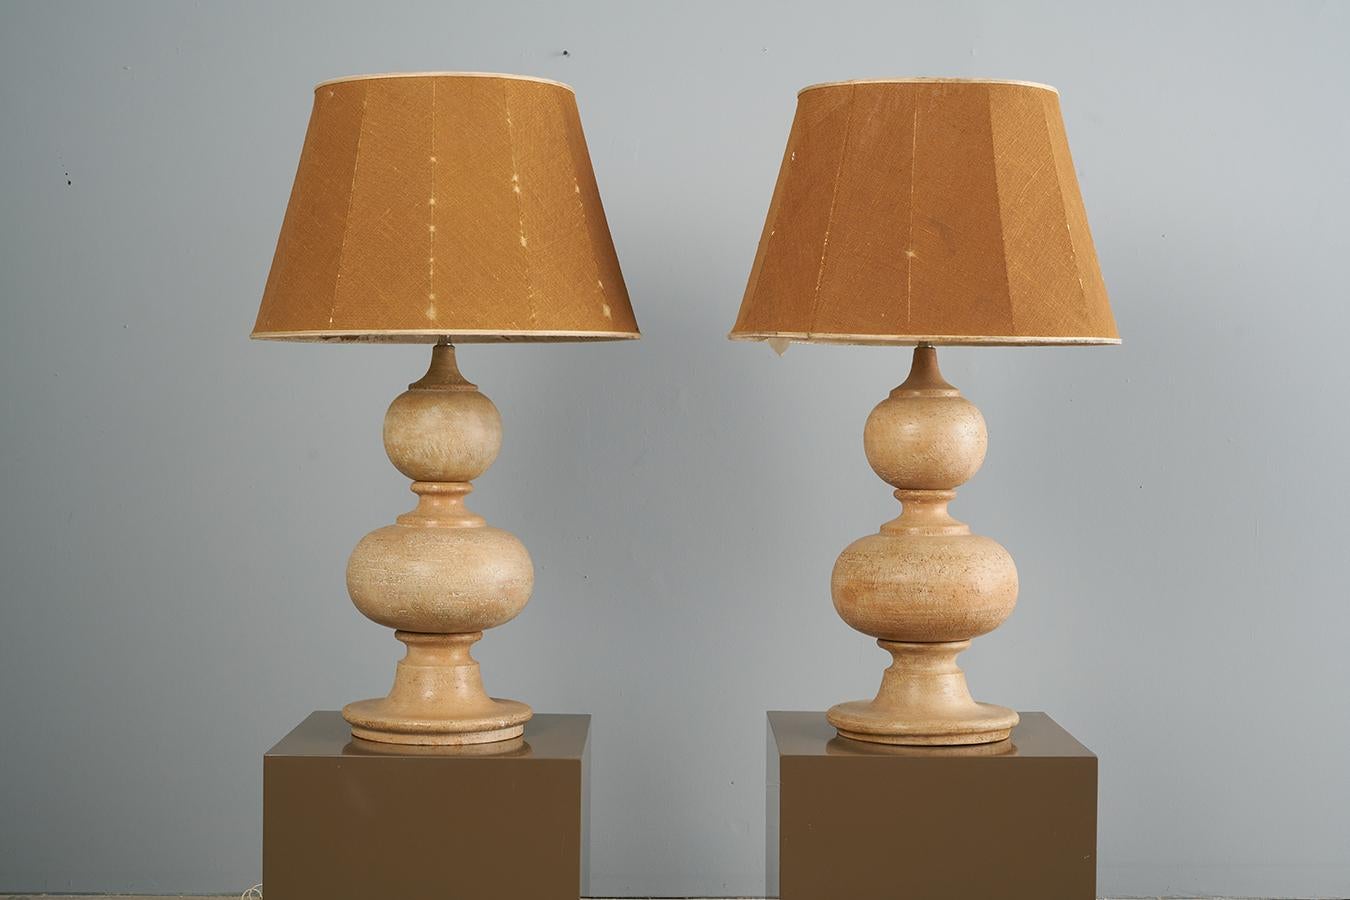 Monumental Pair of Earthenware Italian Ceramic Lamps by Ugo Zaccagnini  In Good Condition For Sale In Greensboro, NC